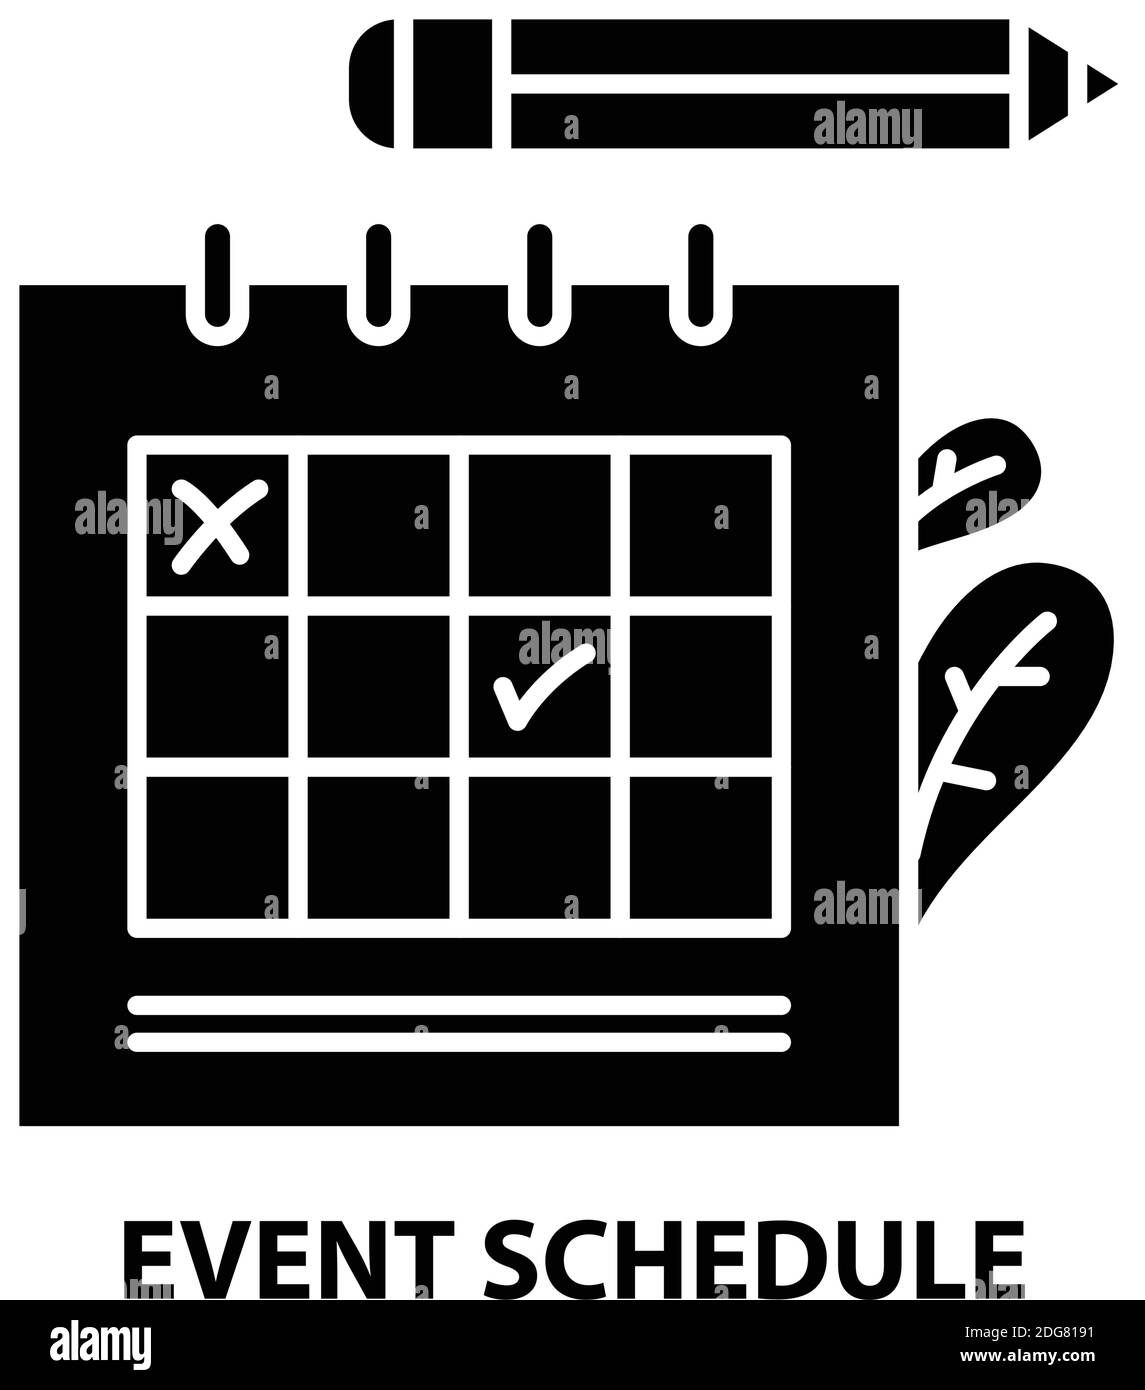 event schedule icon, black vector sign with editable strokes, concept illustration Stock Vector